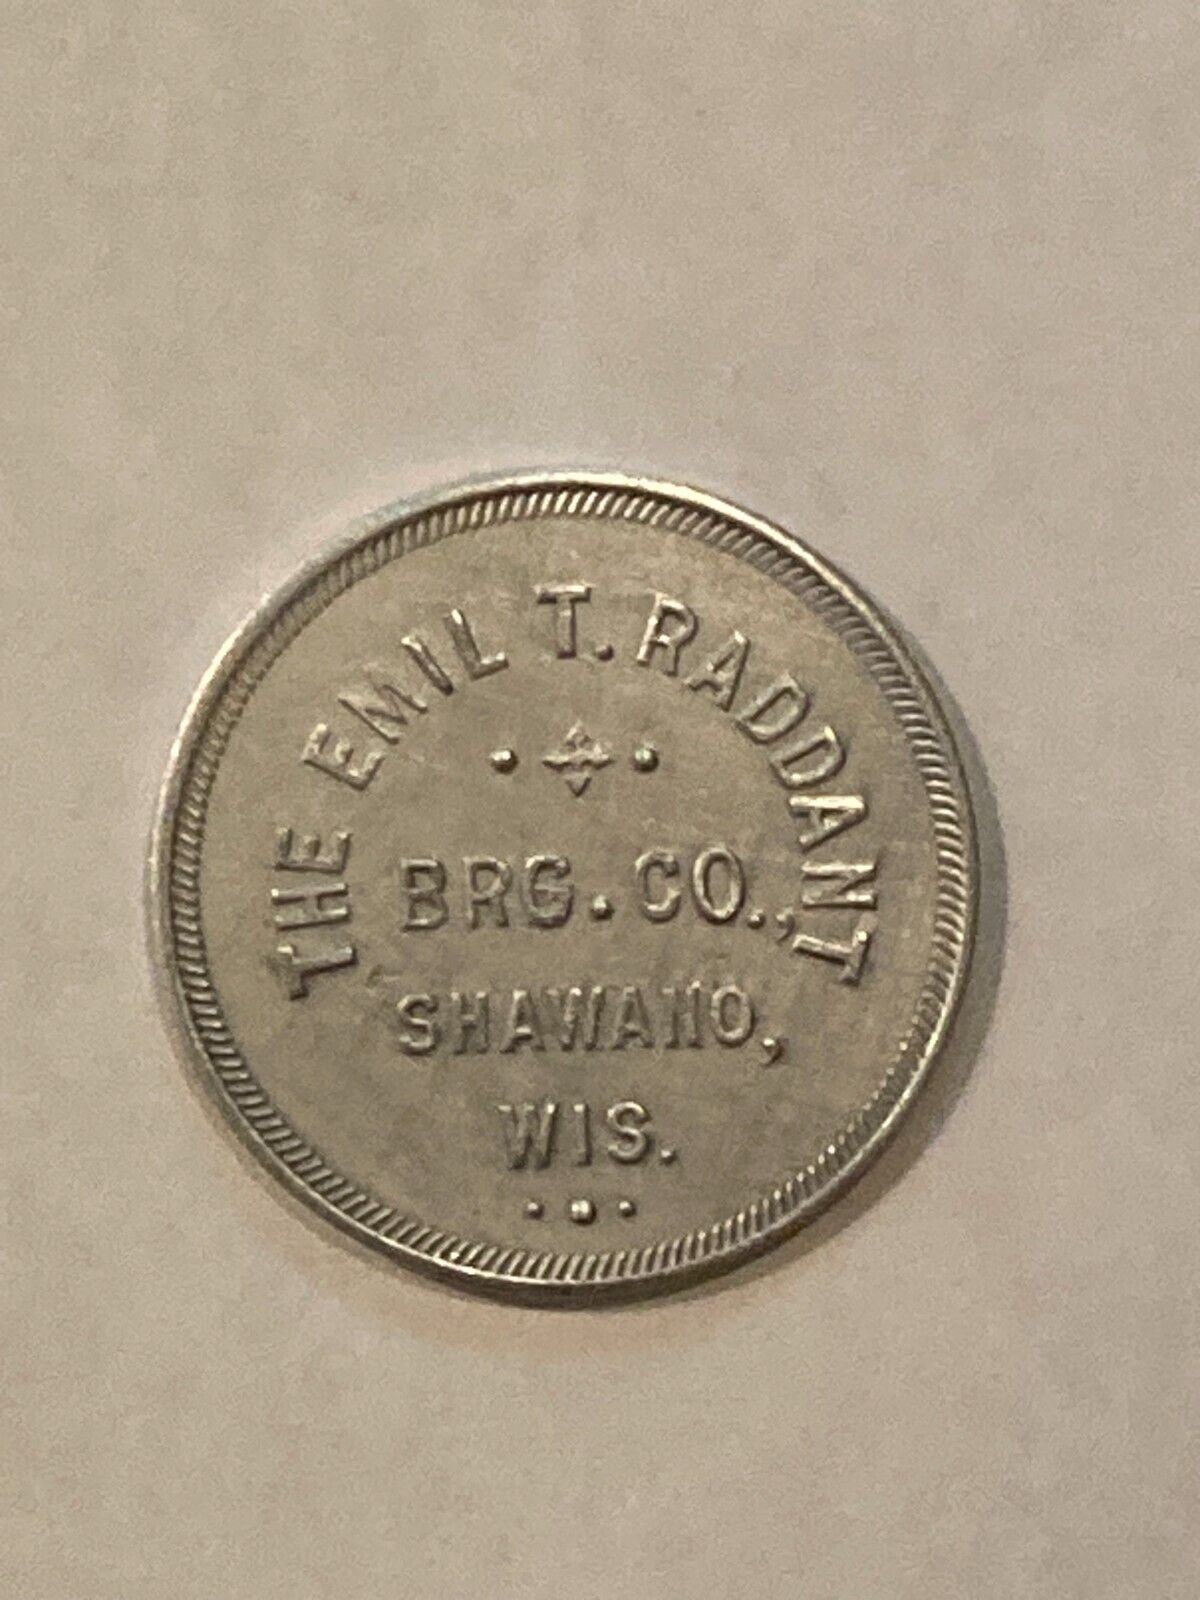 Vintage Emil T. Raddant Brewing Co Shawano WI Aluminum Good For Beer Token